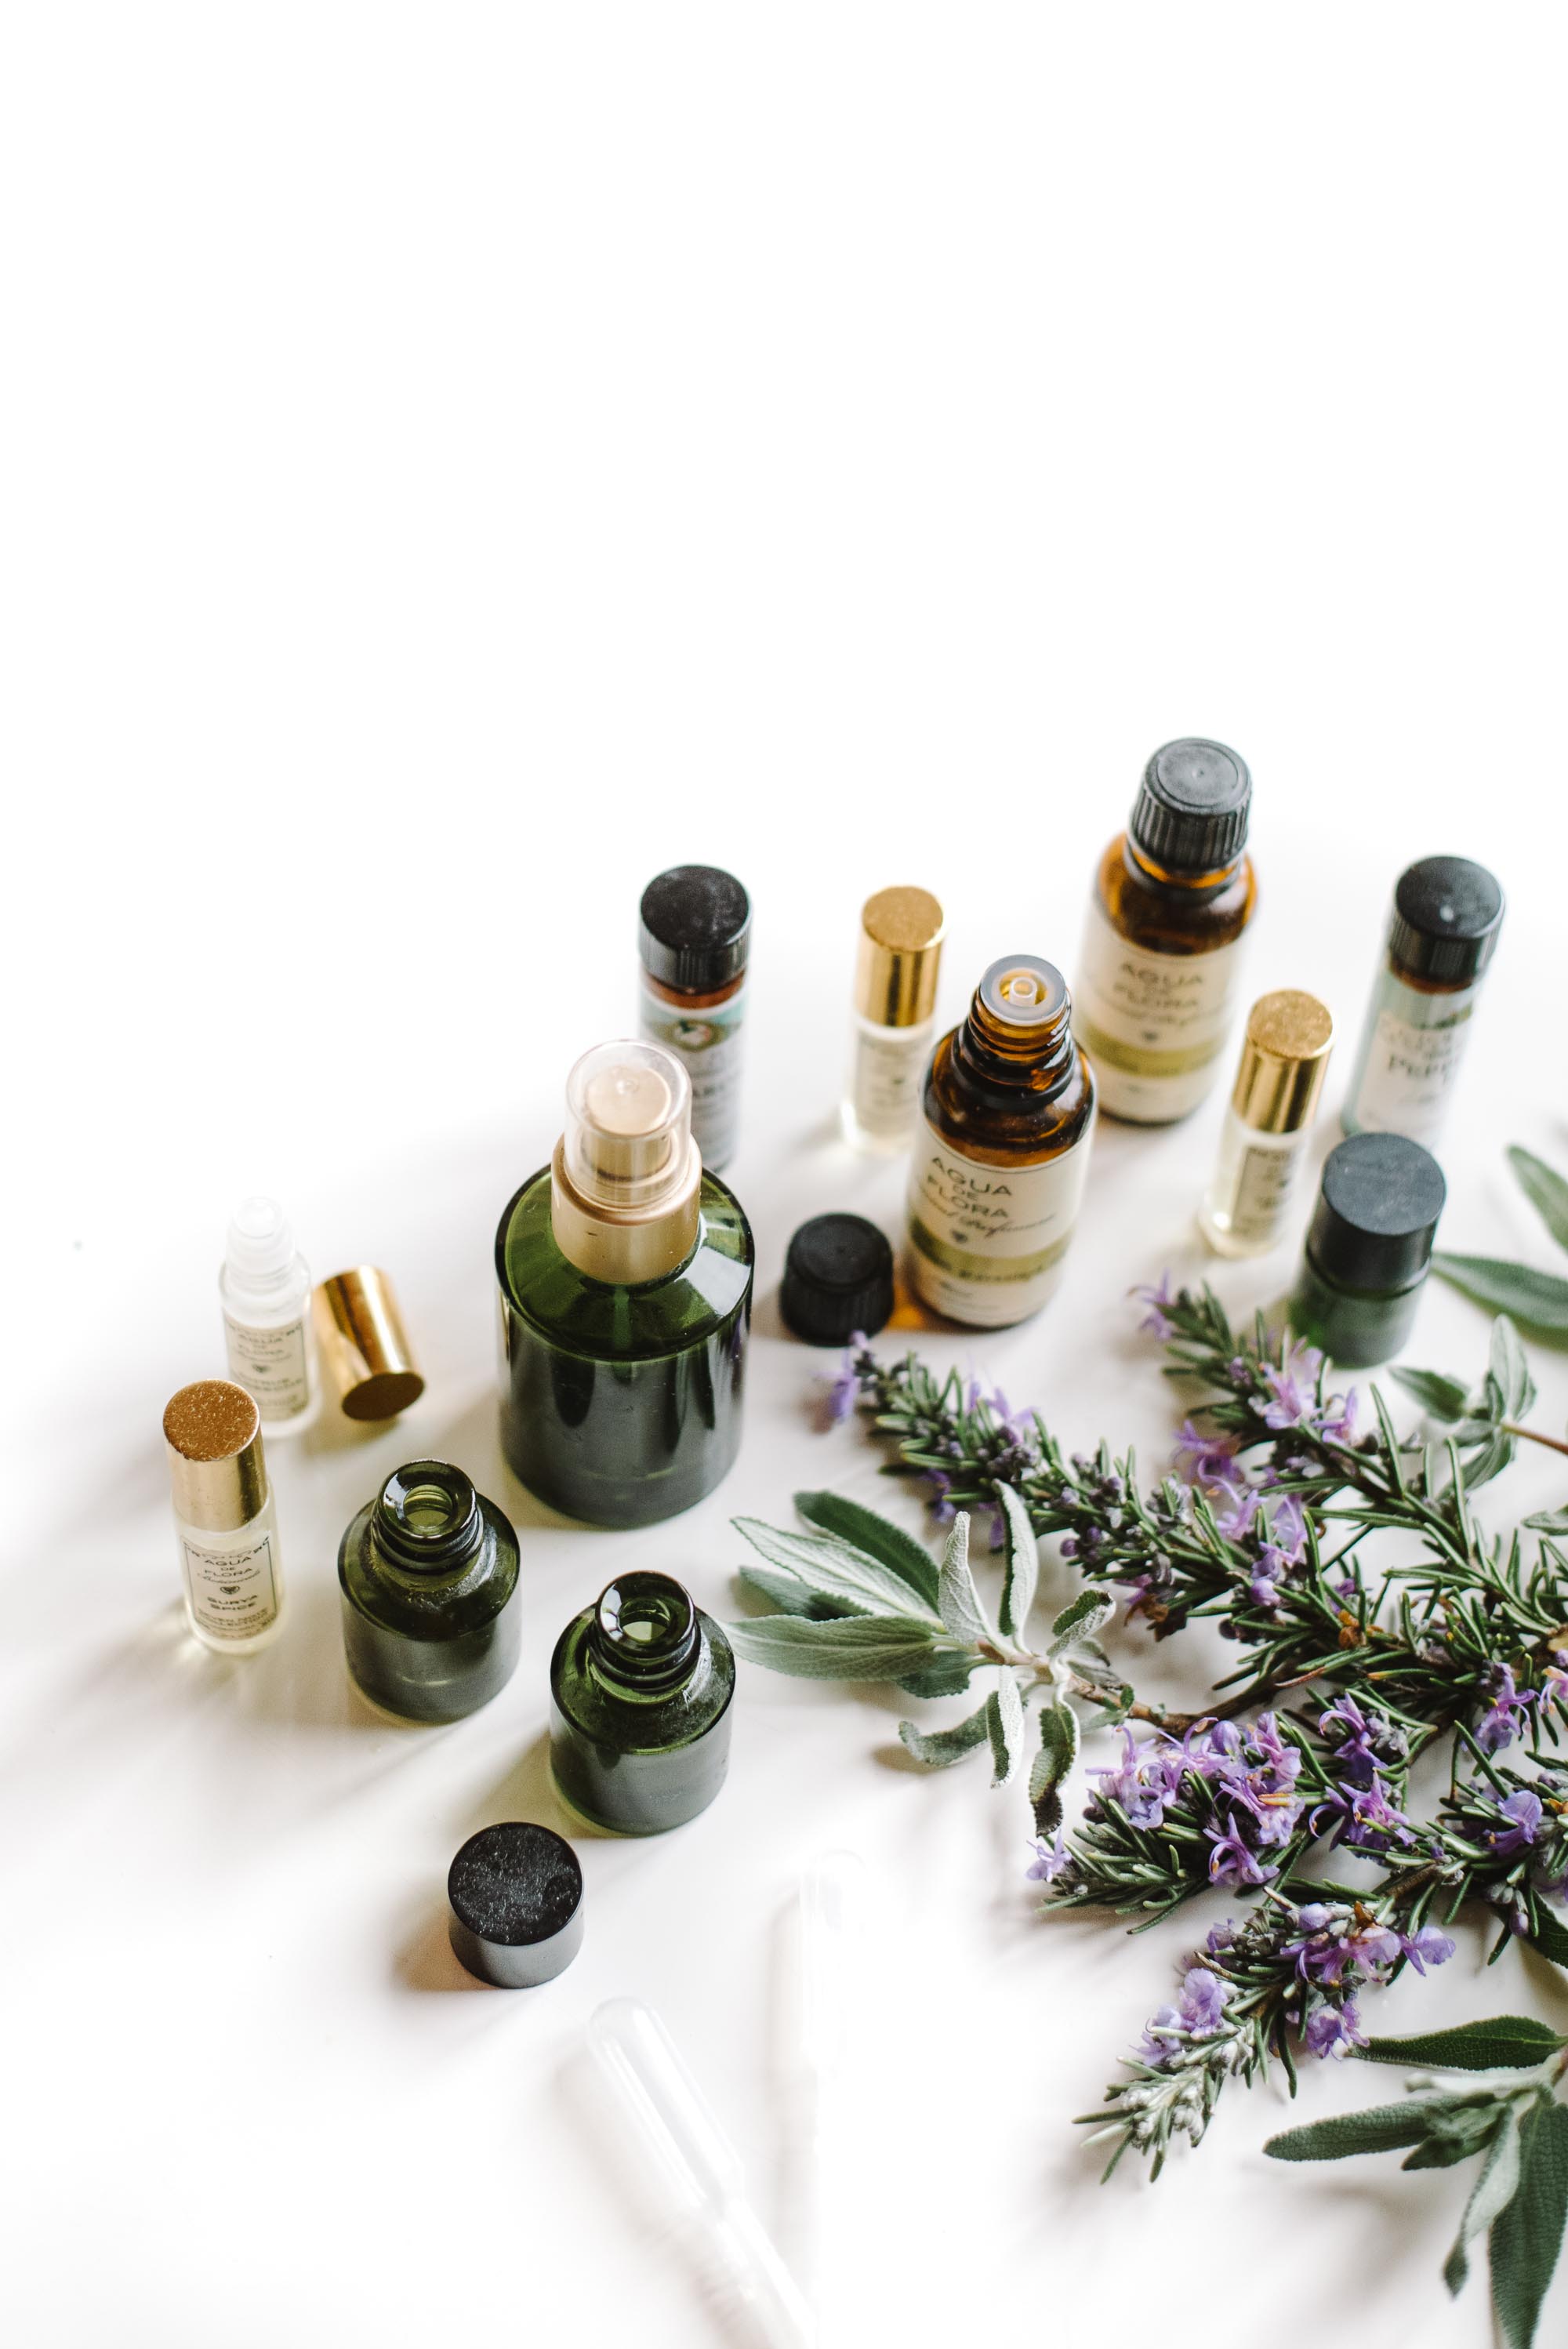 How to Use Essential Oils.